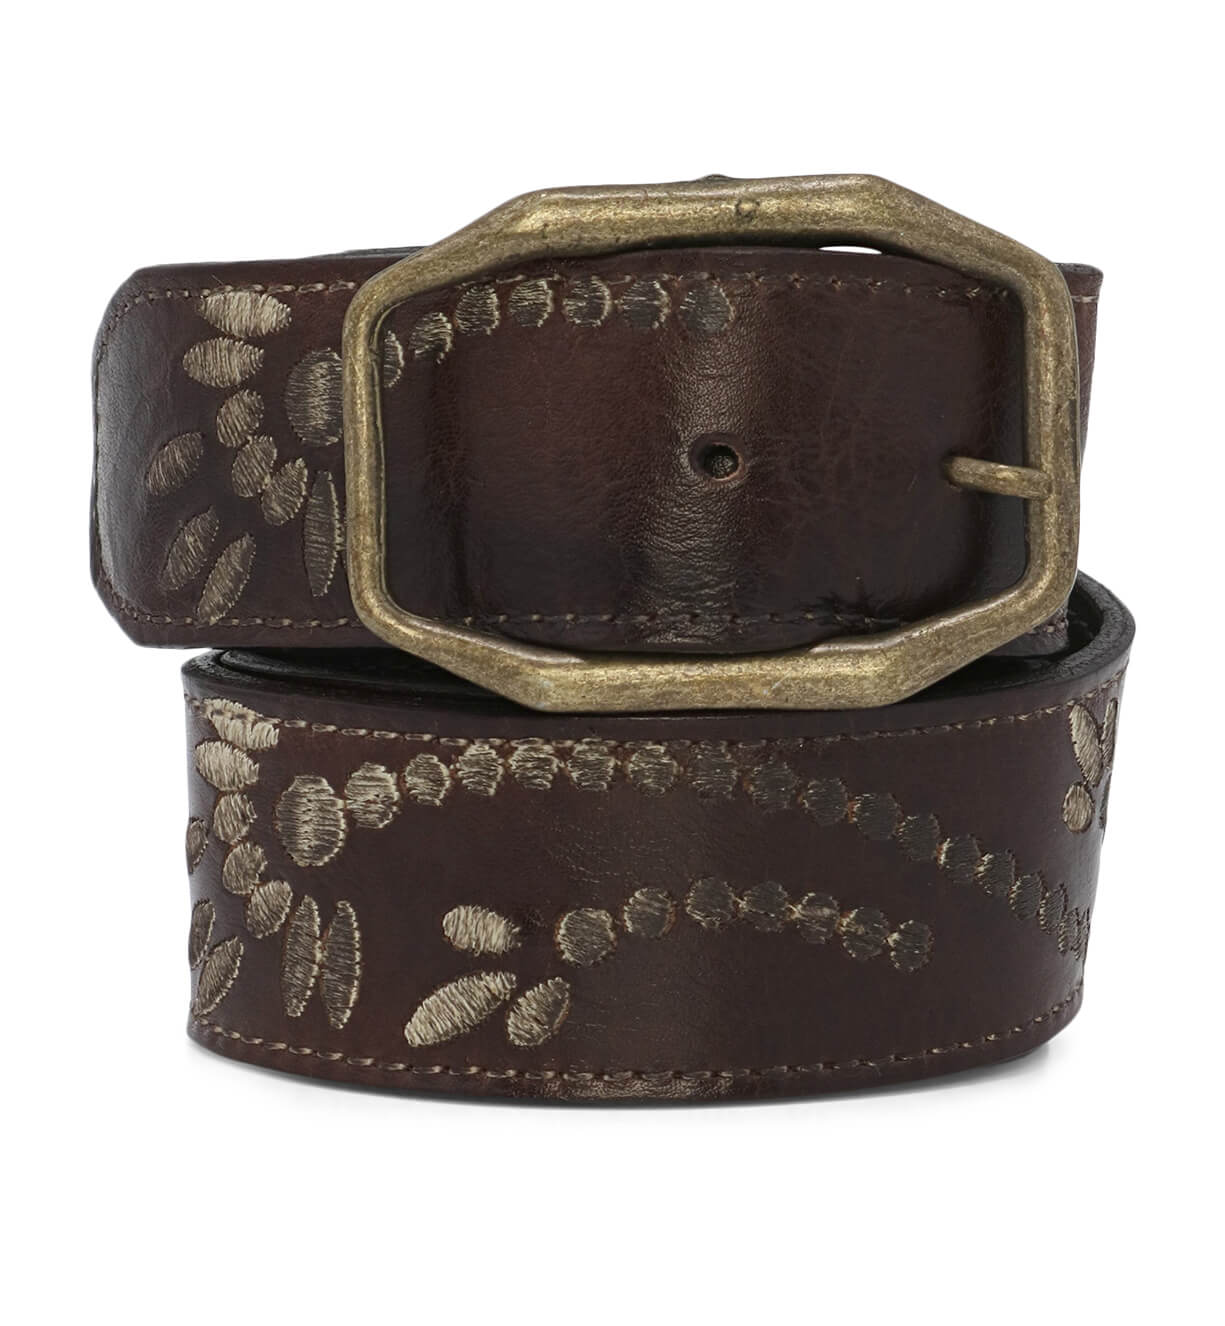 A Mohawk leather belt with a gold buckle by Bed Stu.